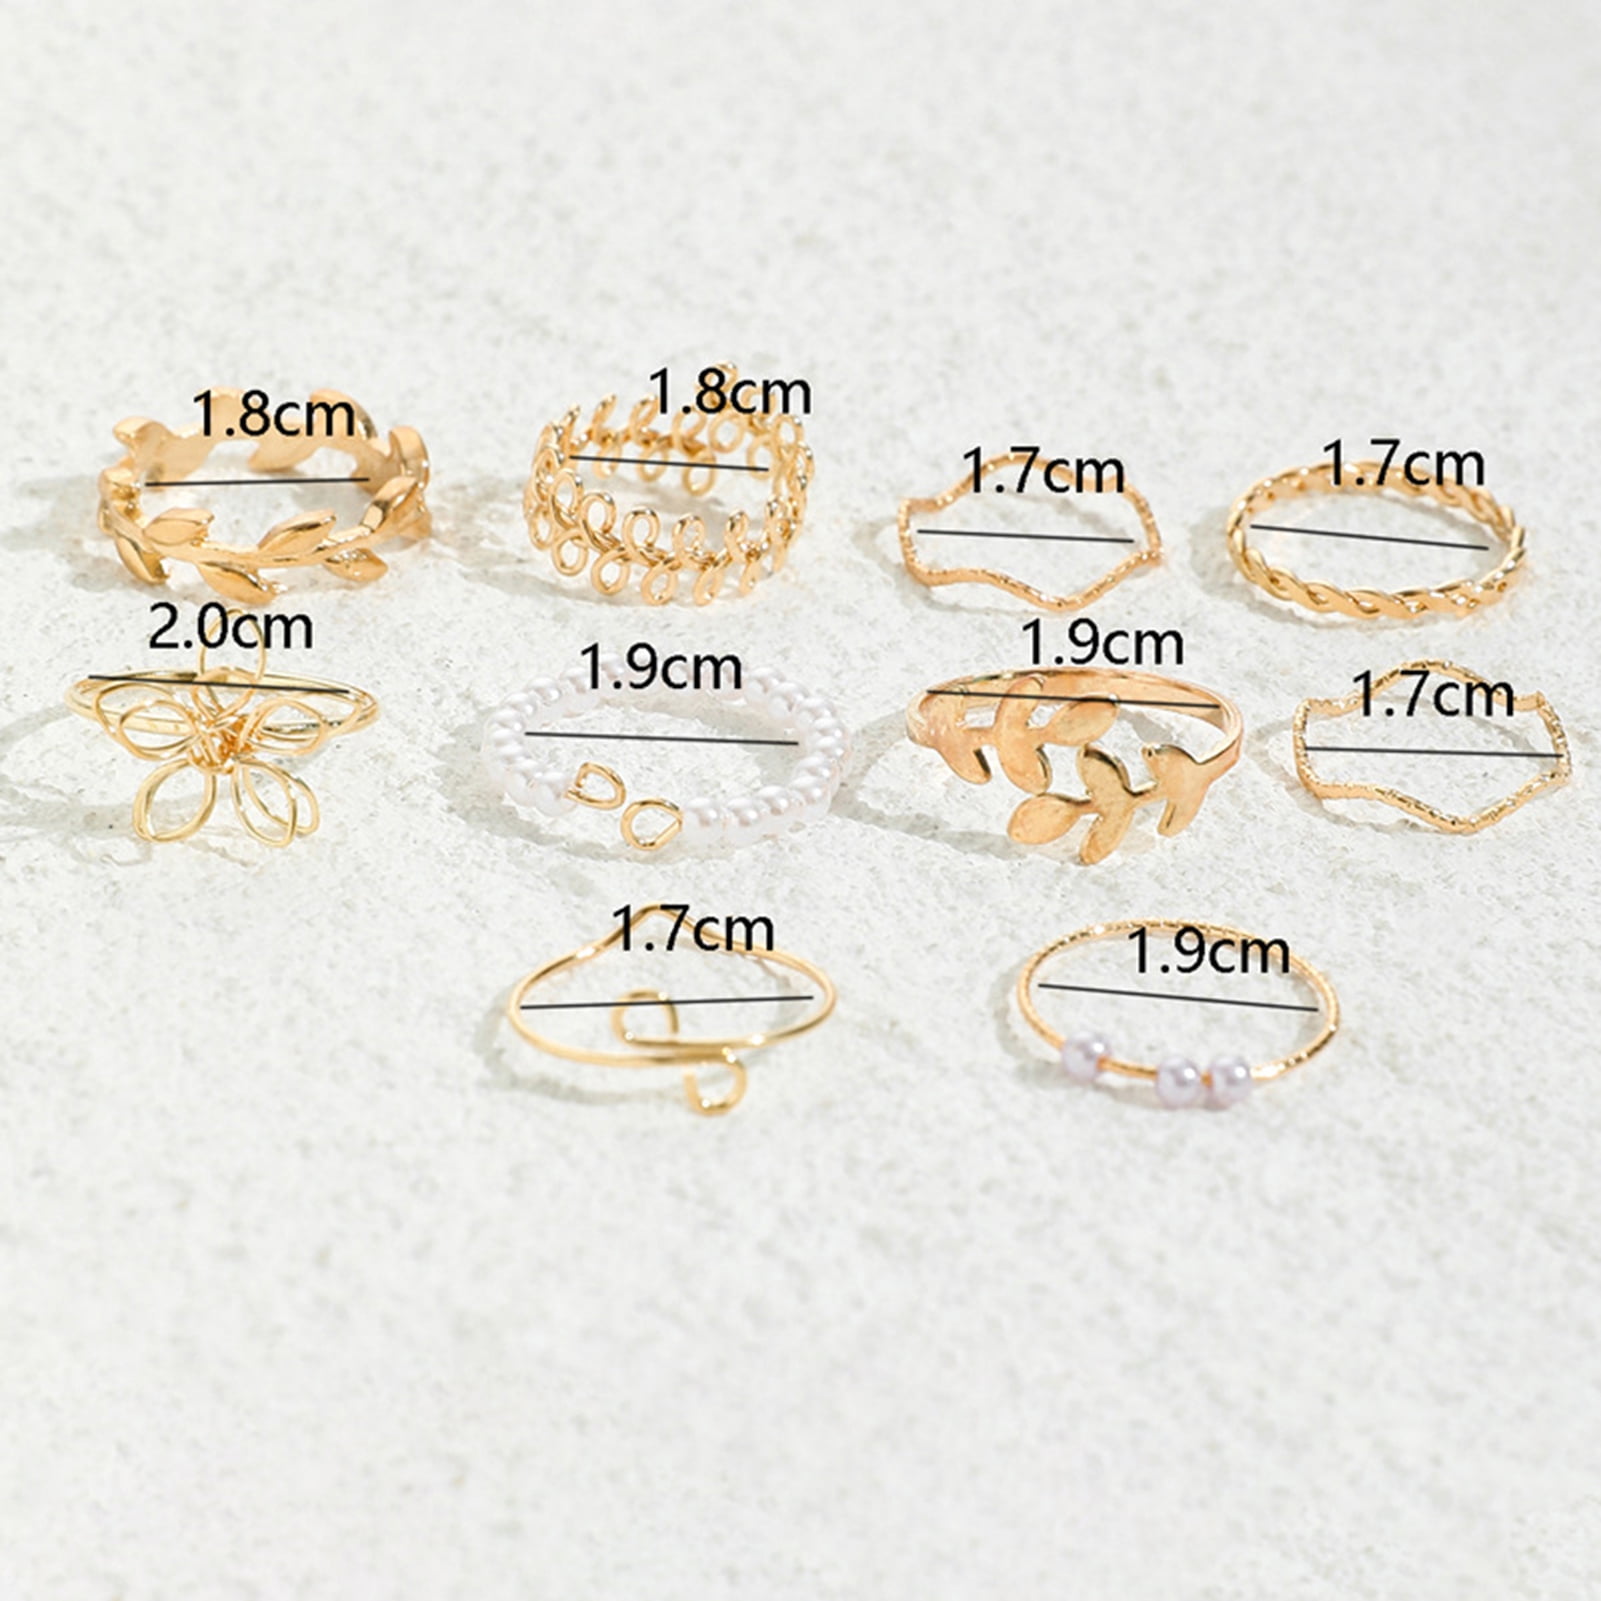 Travelwant 10Pcs Gold Knuckle Rings Set for Women Girls Snake Chain  Stacking Ring Vintage BOHO Midi Rings Size Mixed